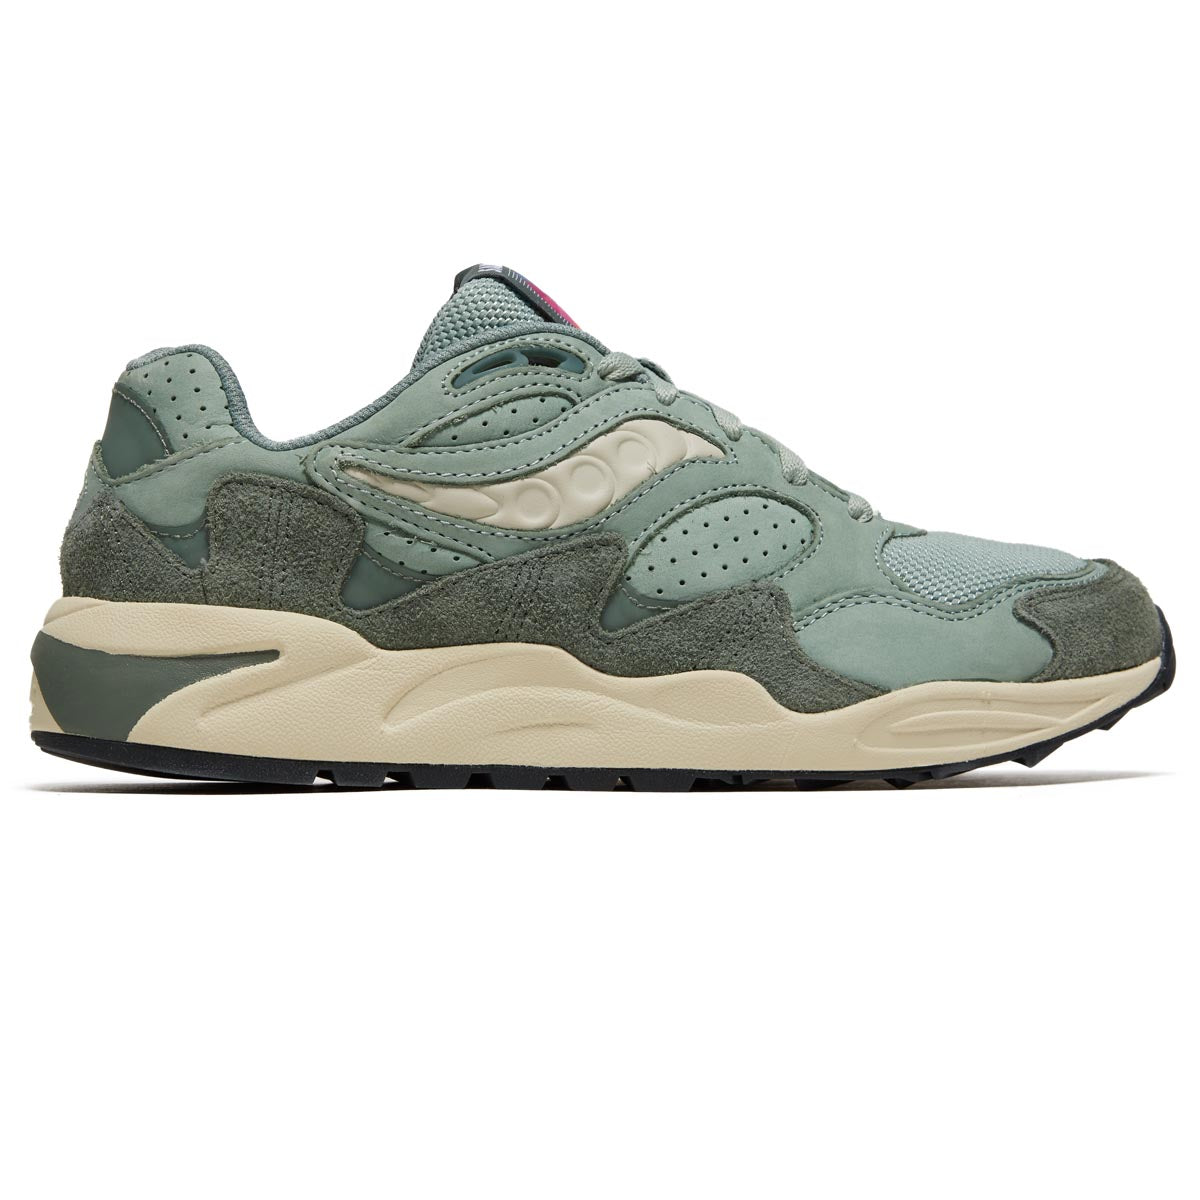 Saucony Grid Shadow 2 Shoes - Sage image 1